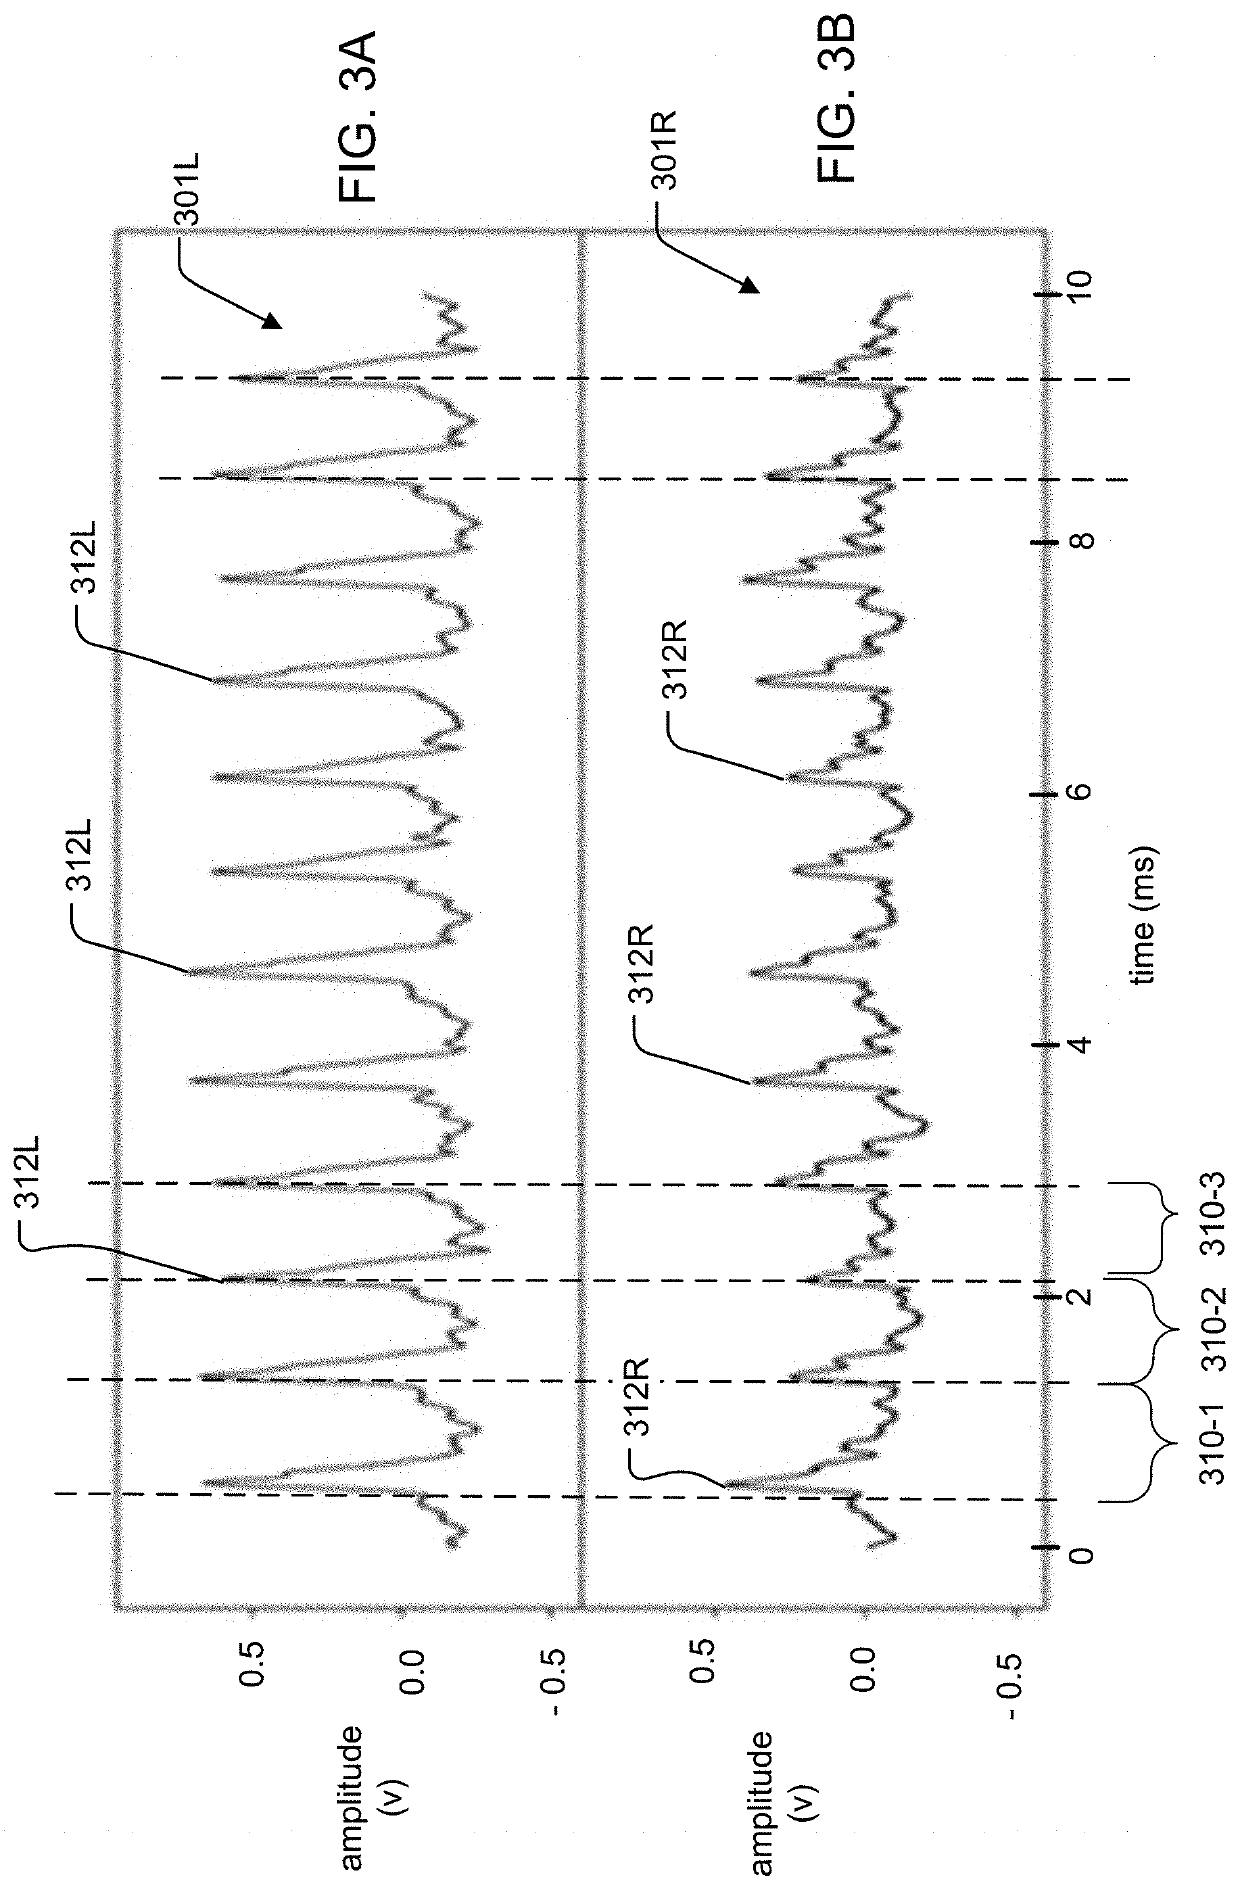 System and Method for Noninvasive Monitoring, Diagnosis and Reporting of Cardiovascular Stenosis